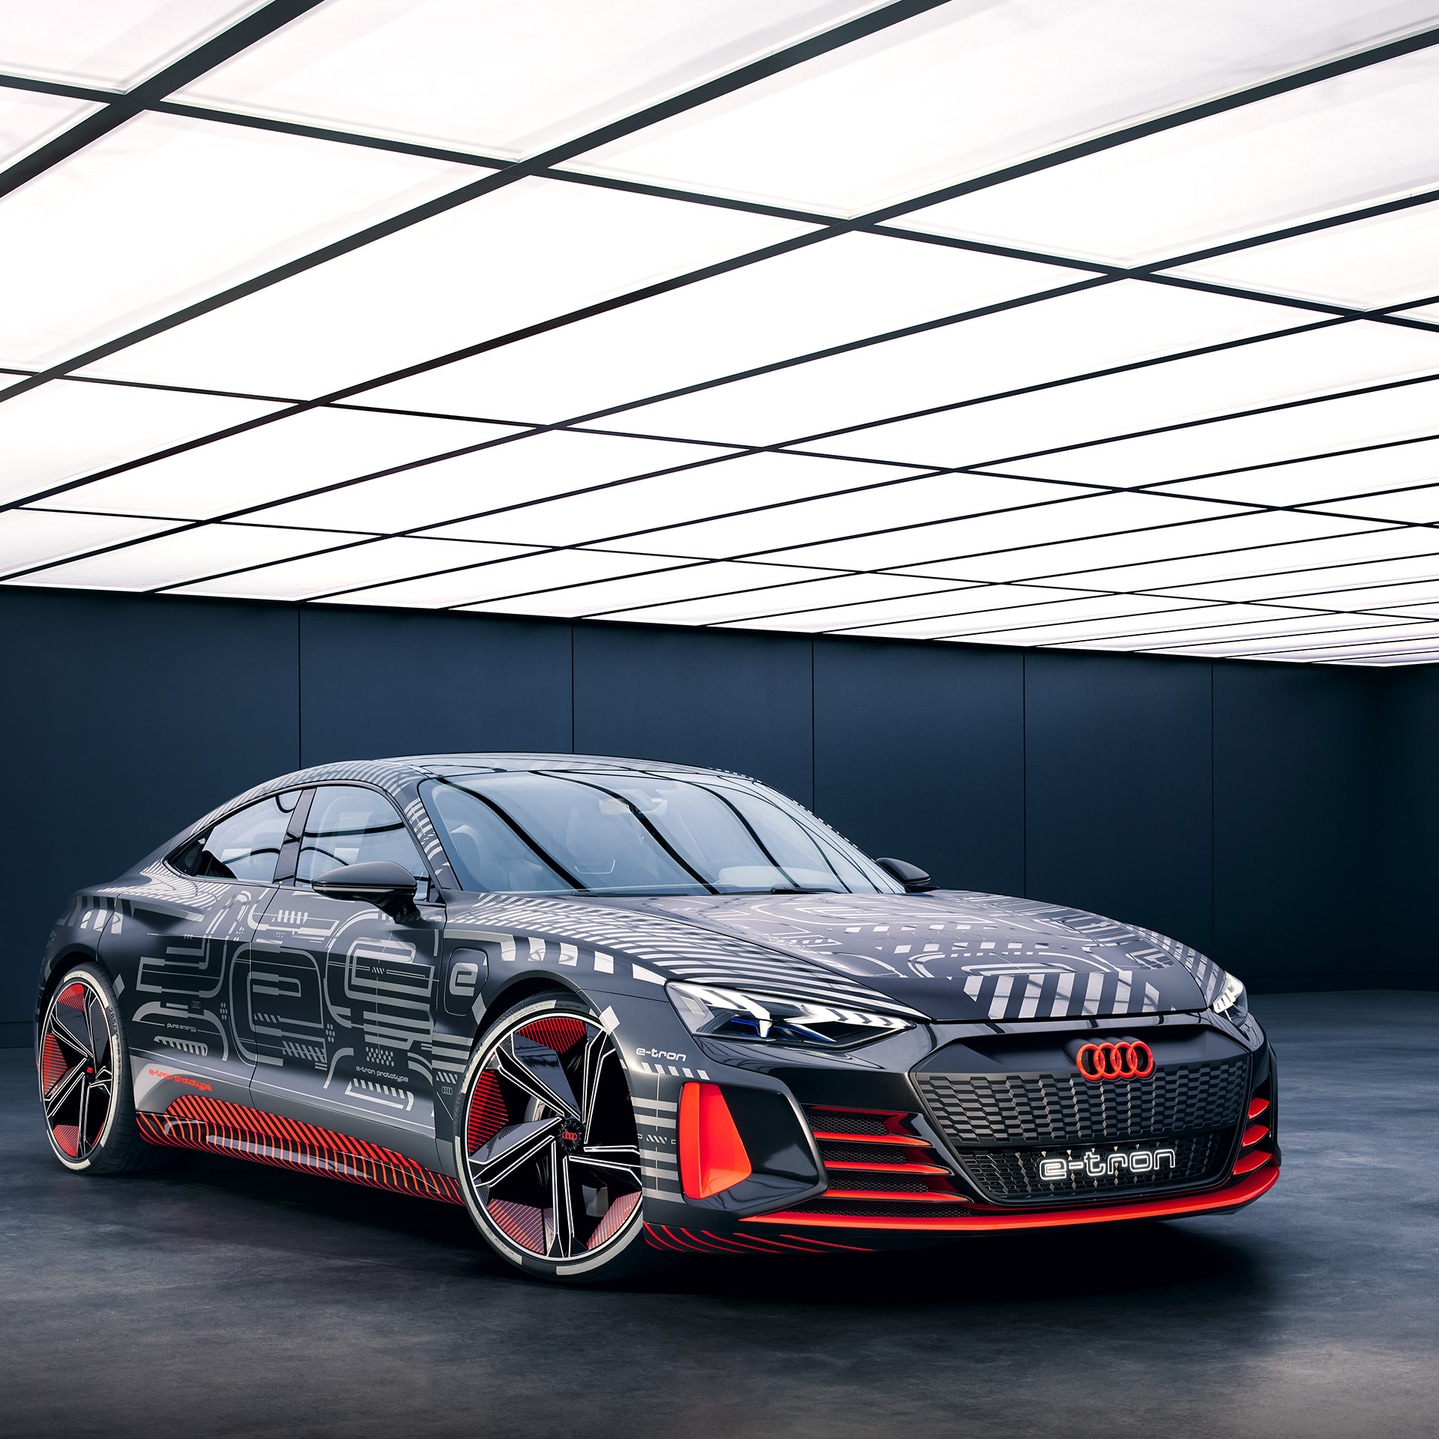 All the performance, minus the consumption: Introducing the Audi e-tron GT  concept